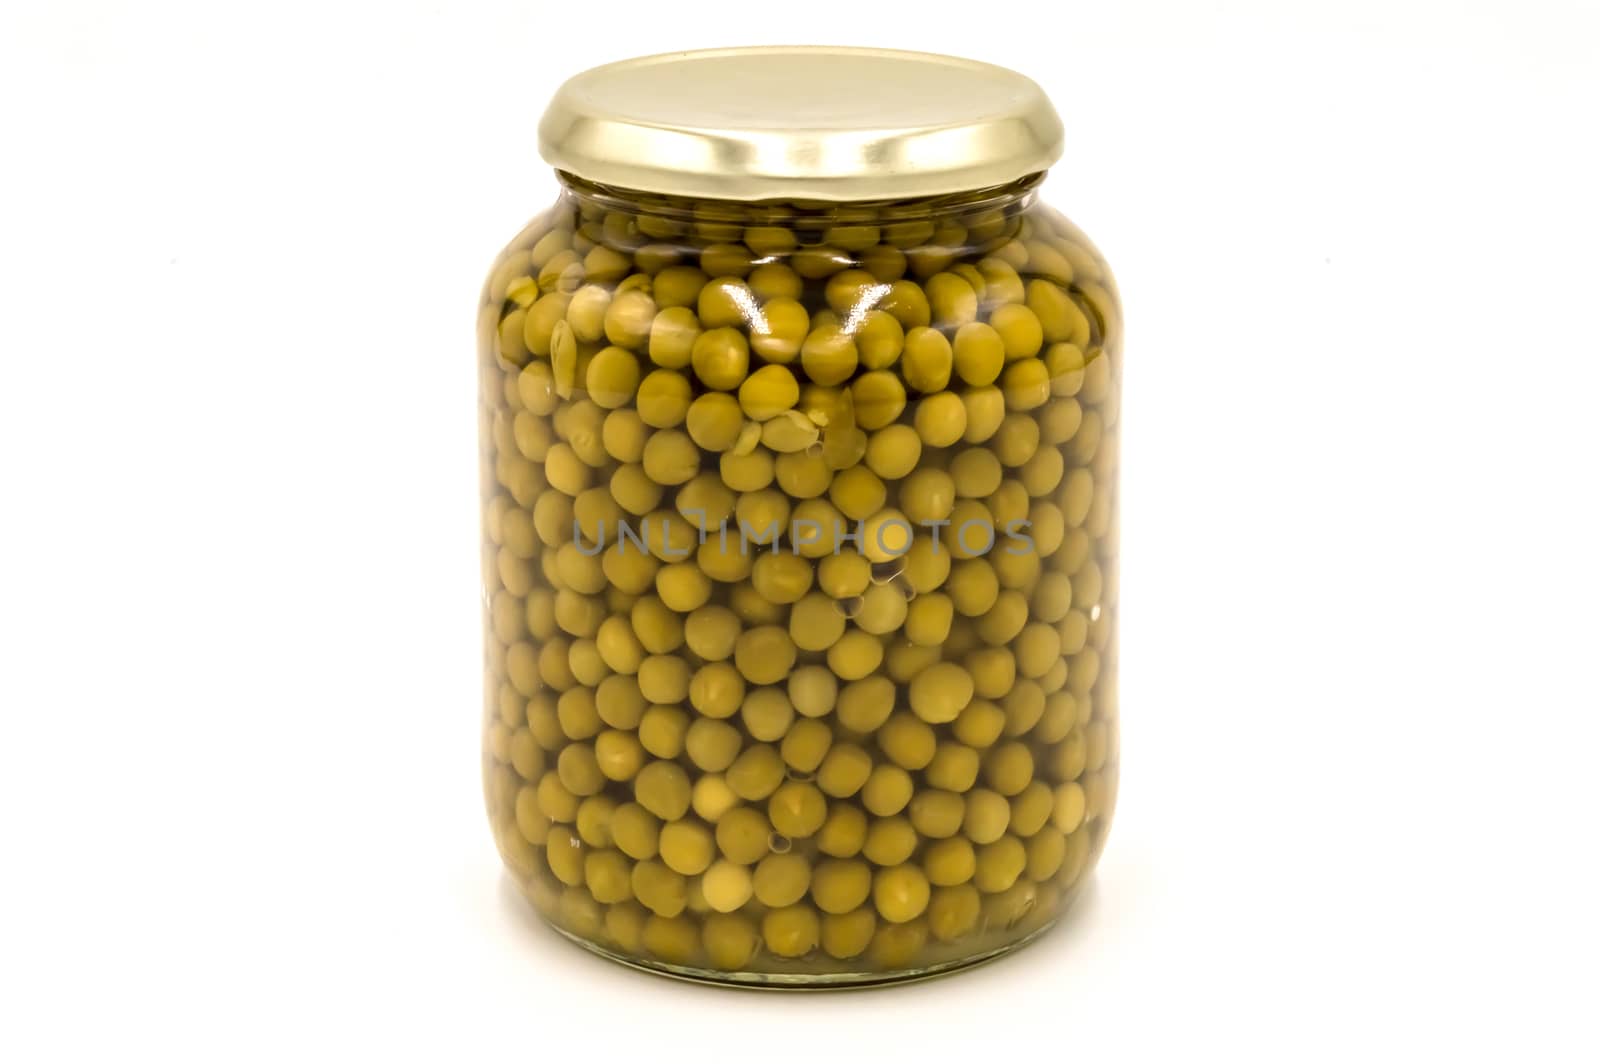 Green peas in a glass jar isolated on a white background